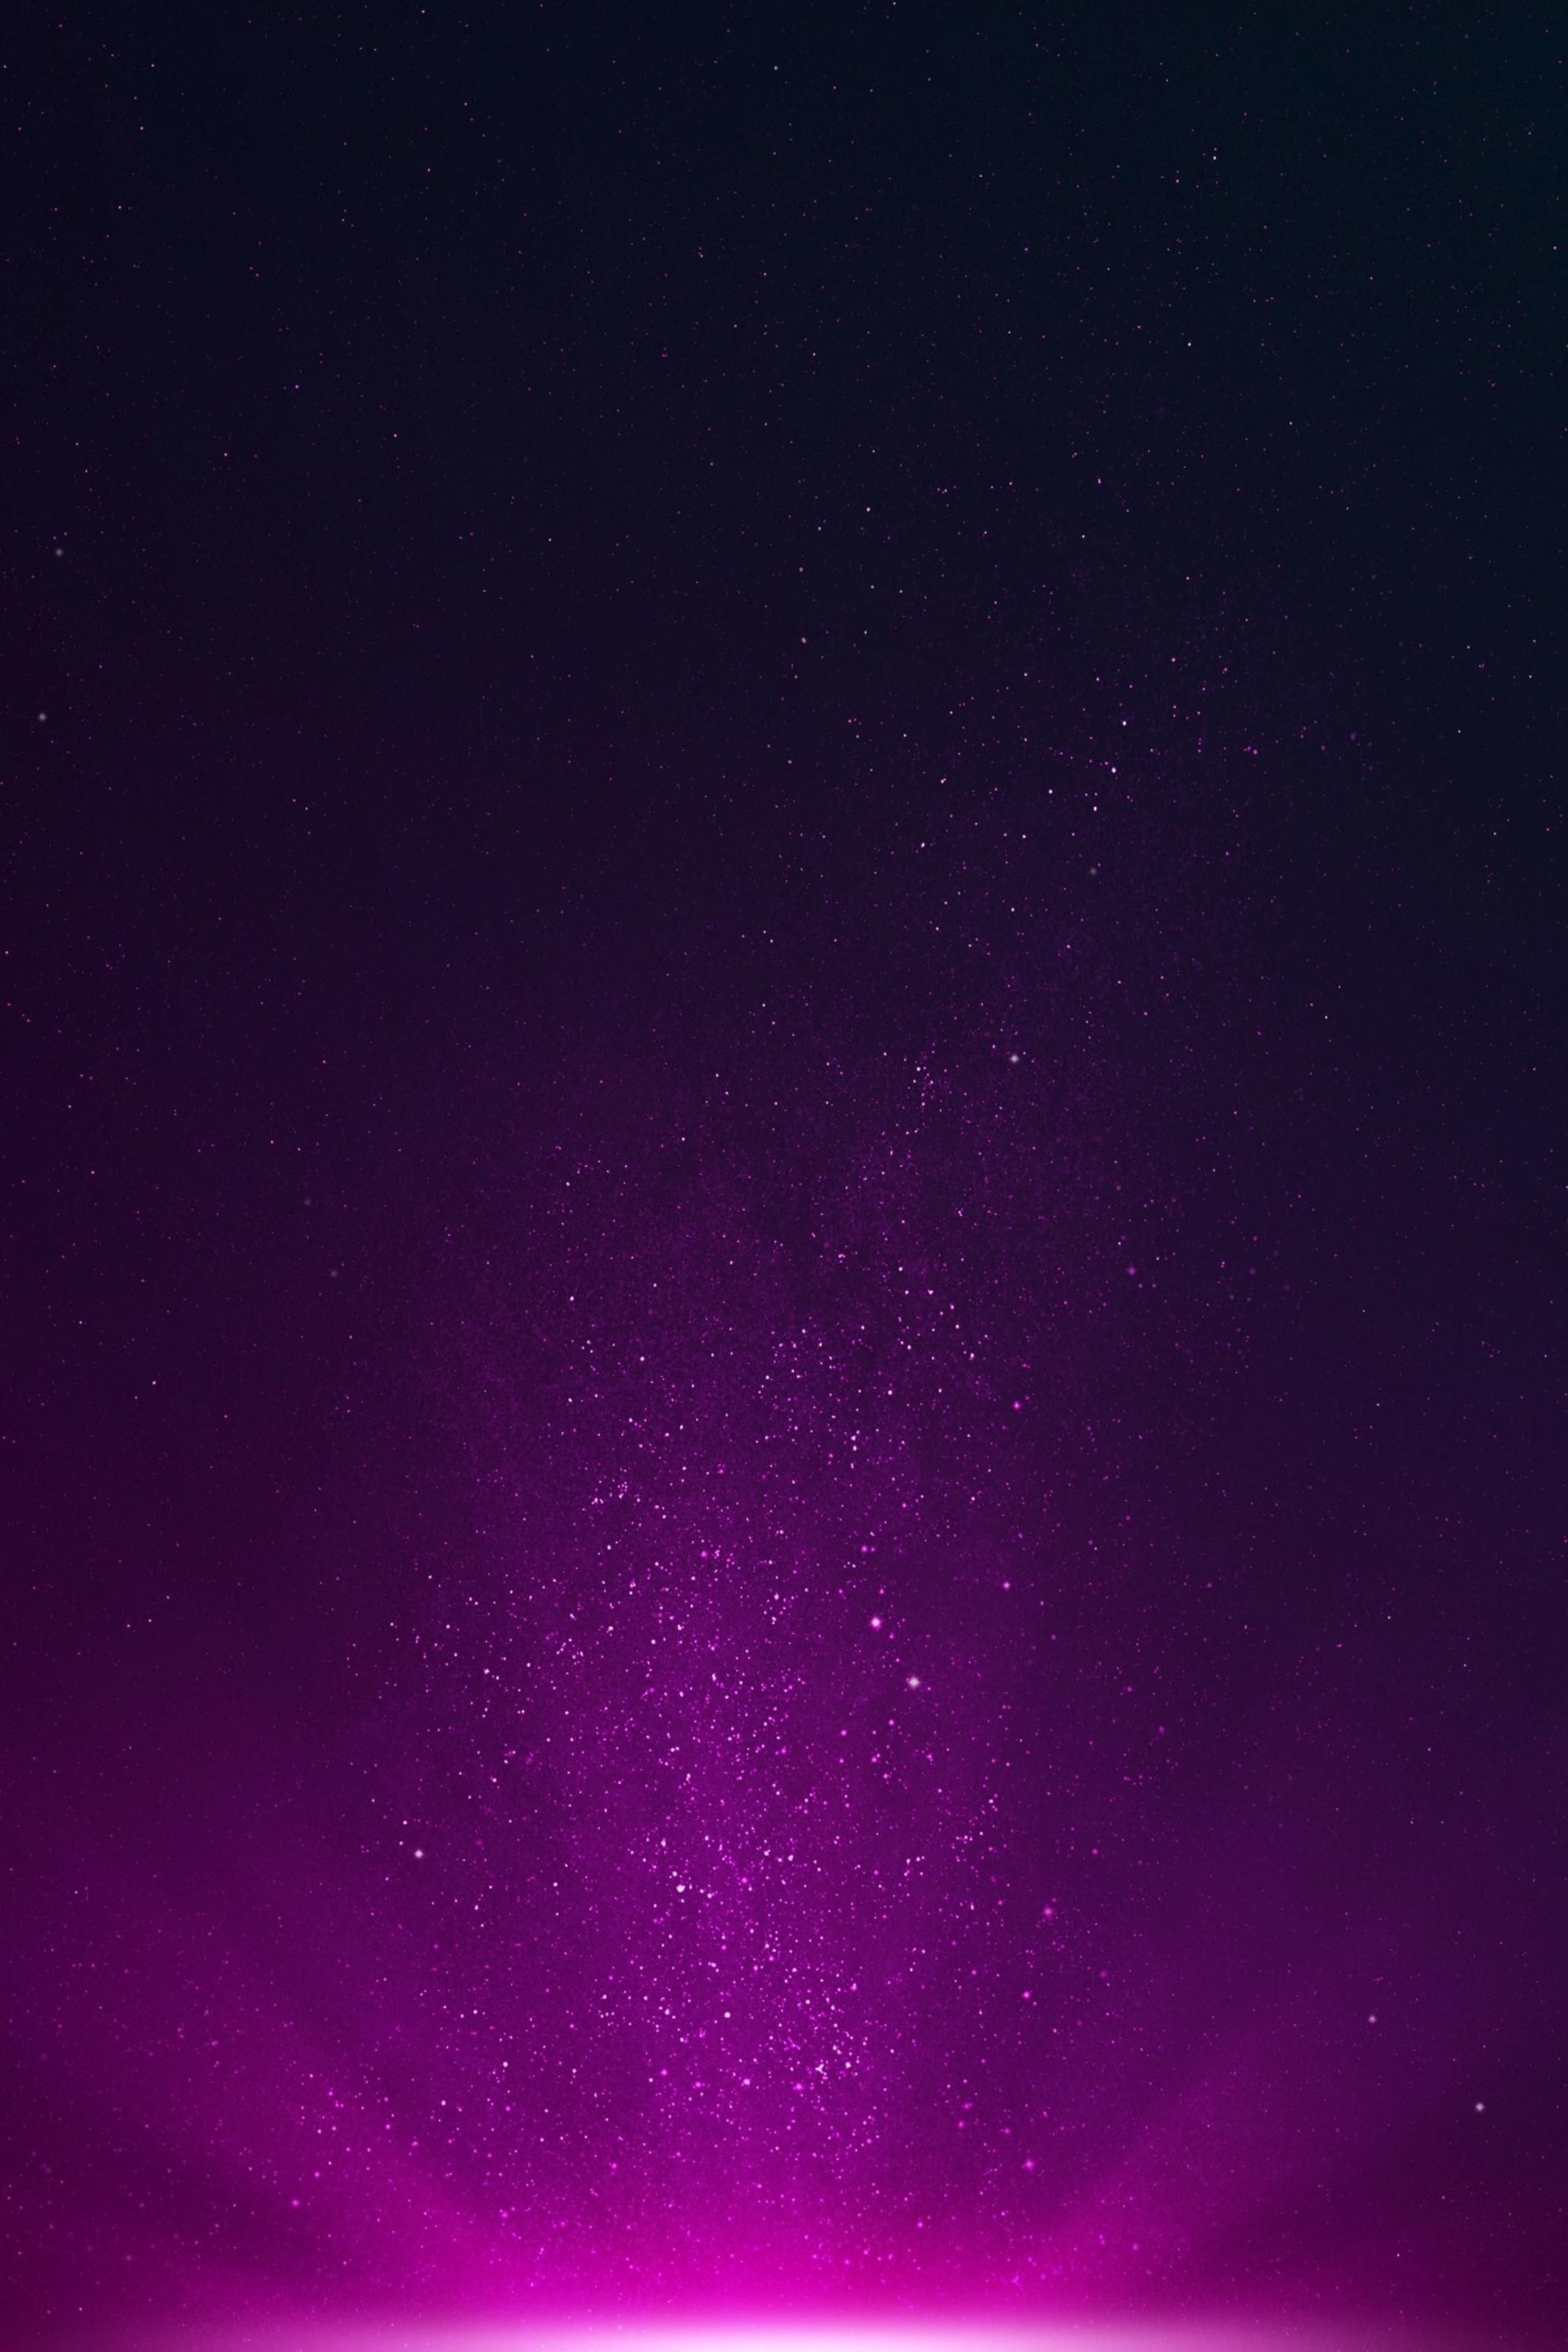 AMOLED Abstract Wallpaper. iPhone background wallpaper, Purple wallpaper, Graffiti wallpaper iphone